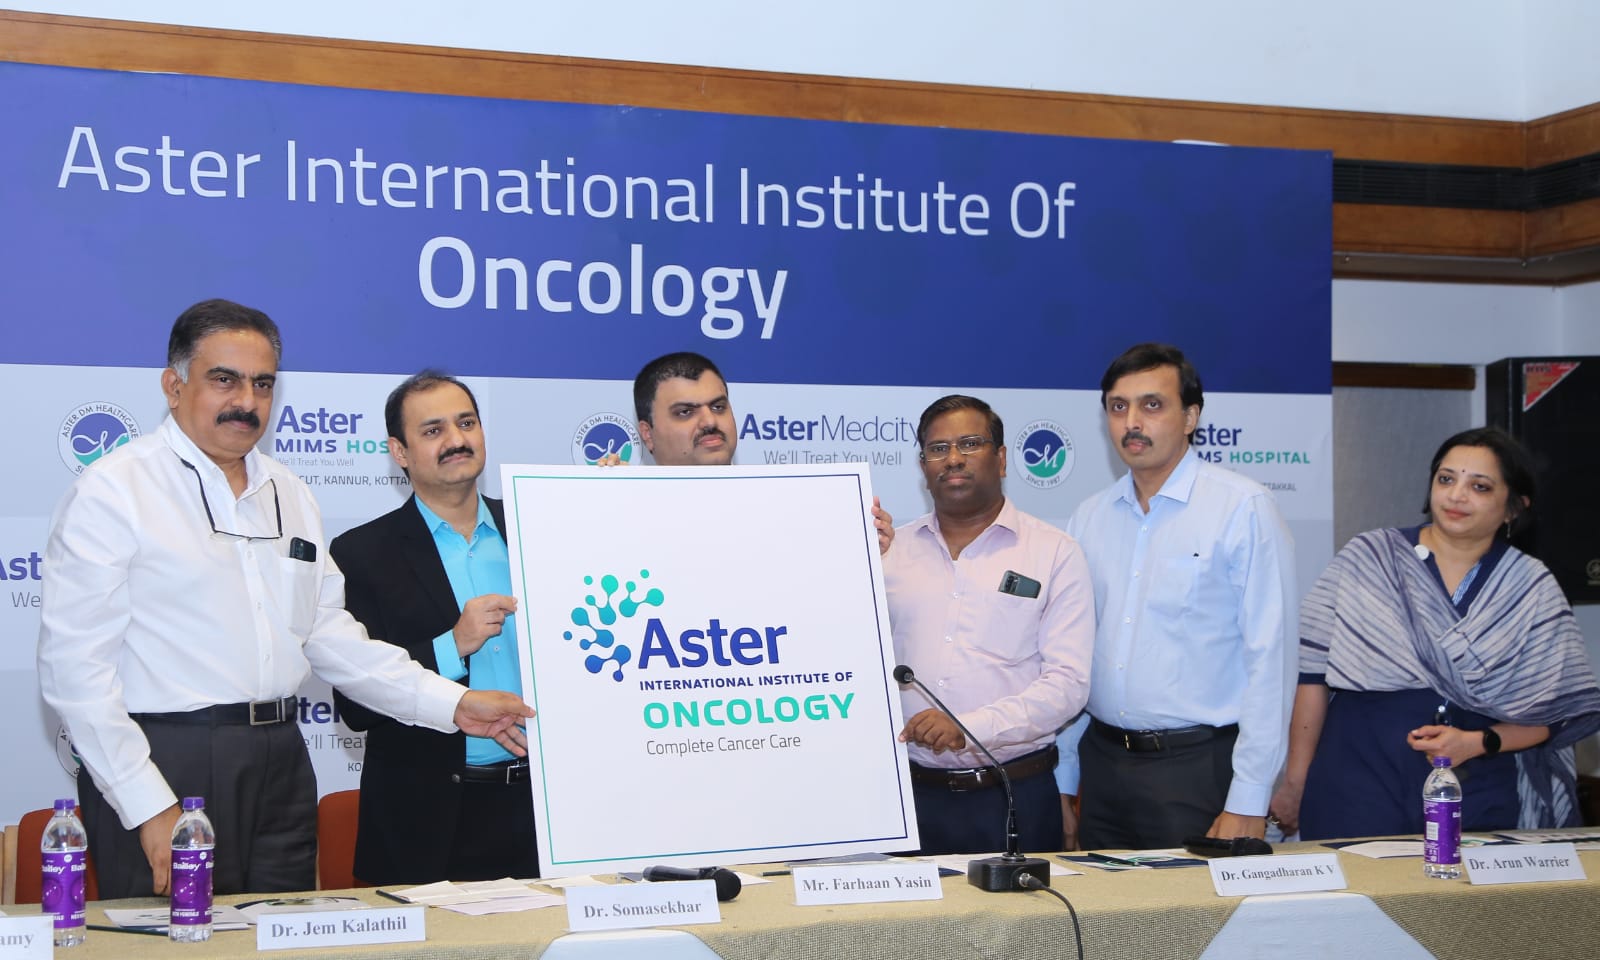 Aster Hospitals Kerala has relaunched the oncology services under Aster International Institute of Oncology (AIIO), a Centre of excellence for all cancer treatments and robotic surgery, to offer the most advanced, multidisciplinary treatment plans. Using modern technology, the centres provide the same cure rates and cosmesis while also improving the quality of life. The institute brings together the best medical talents, treatment practices, and technologies across our hospitals in Kerala under one roof and